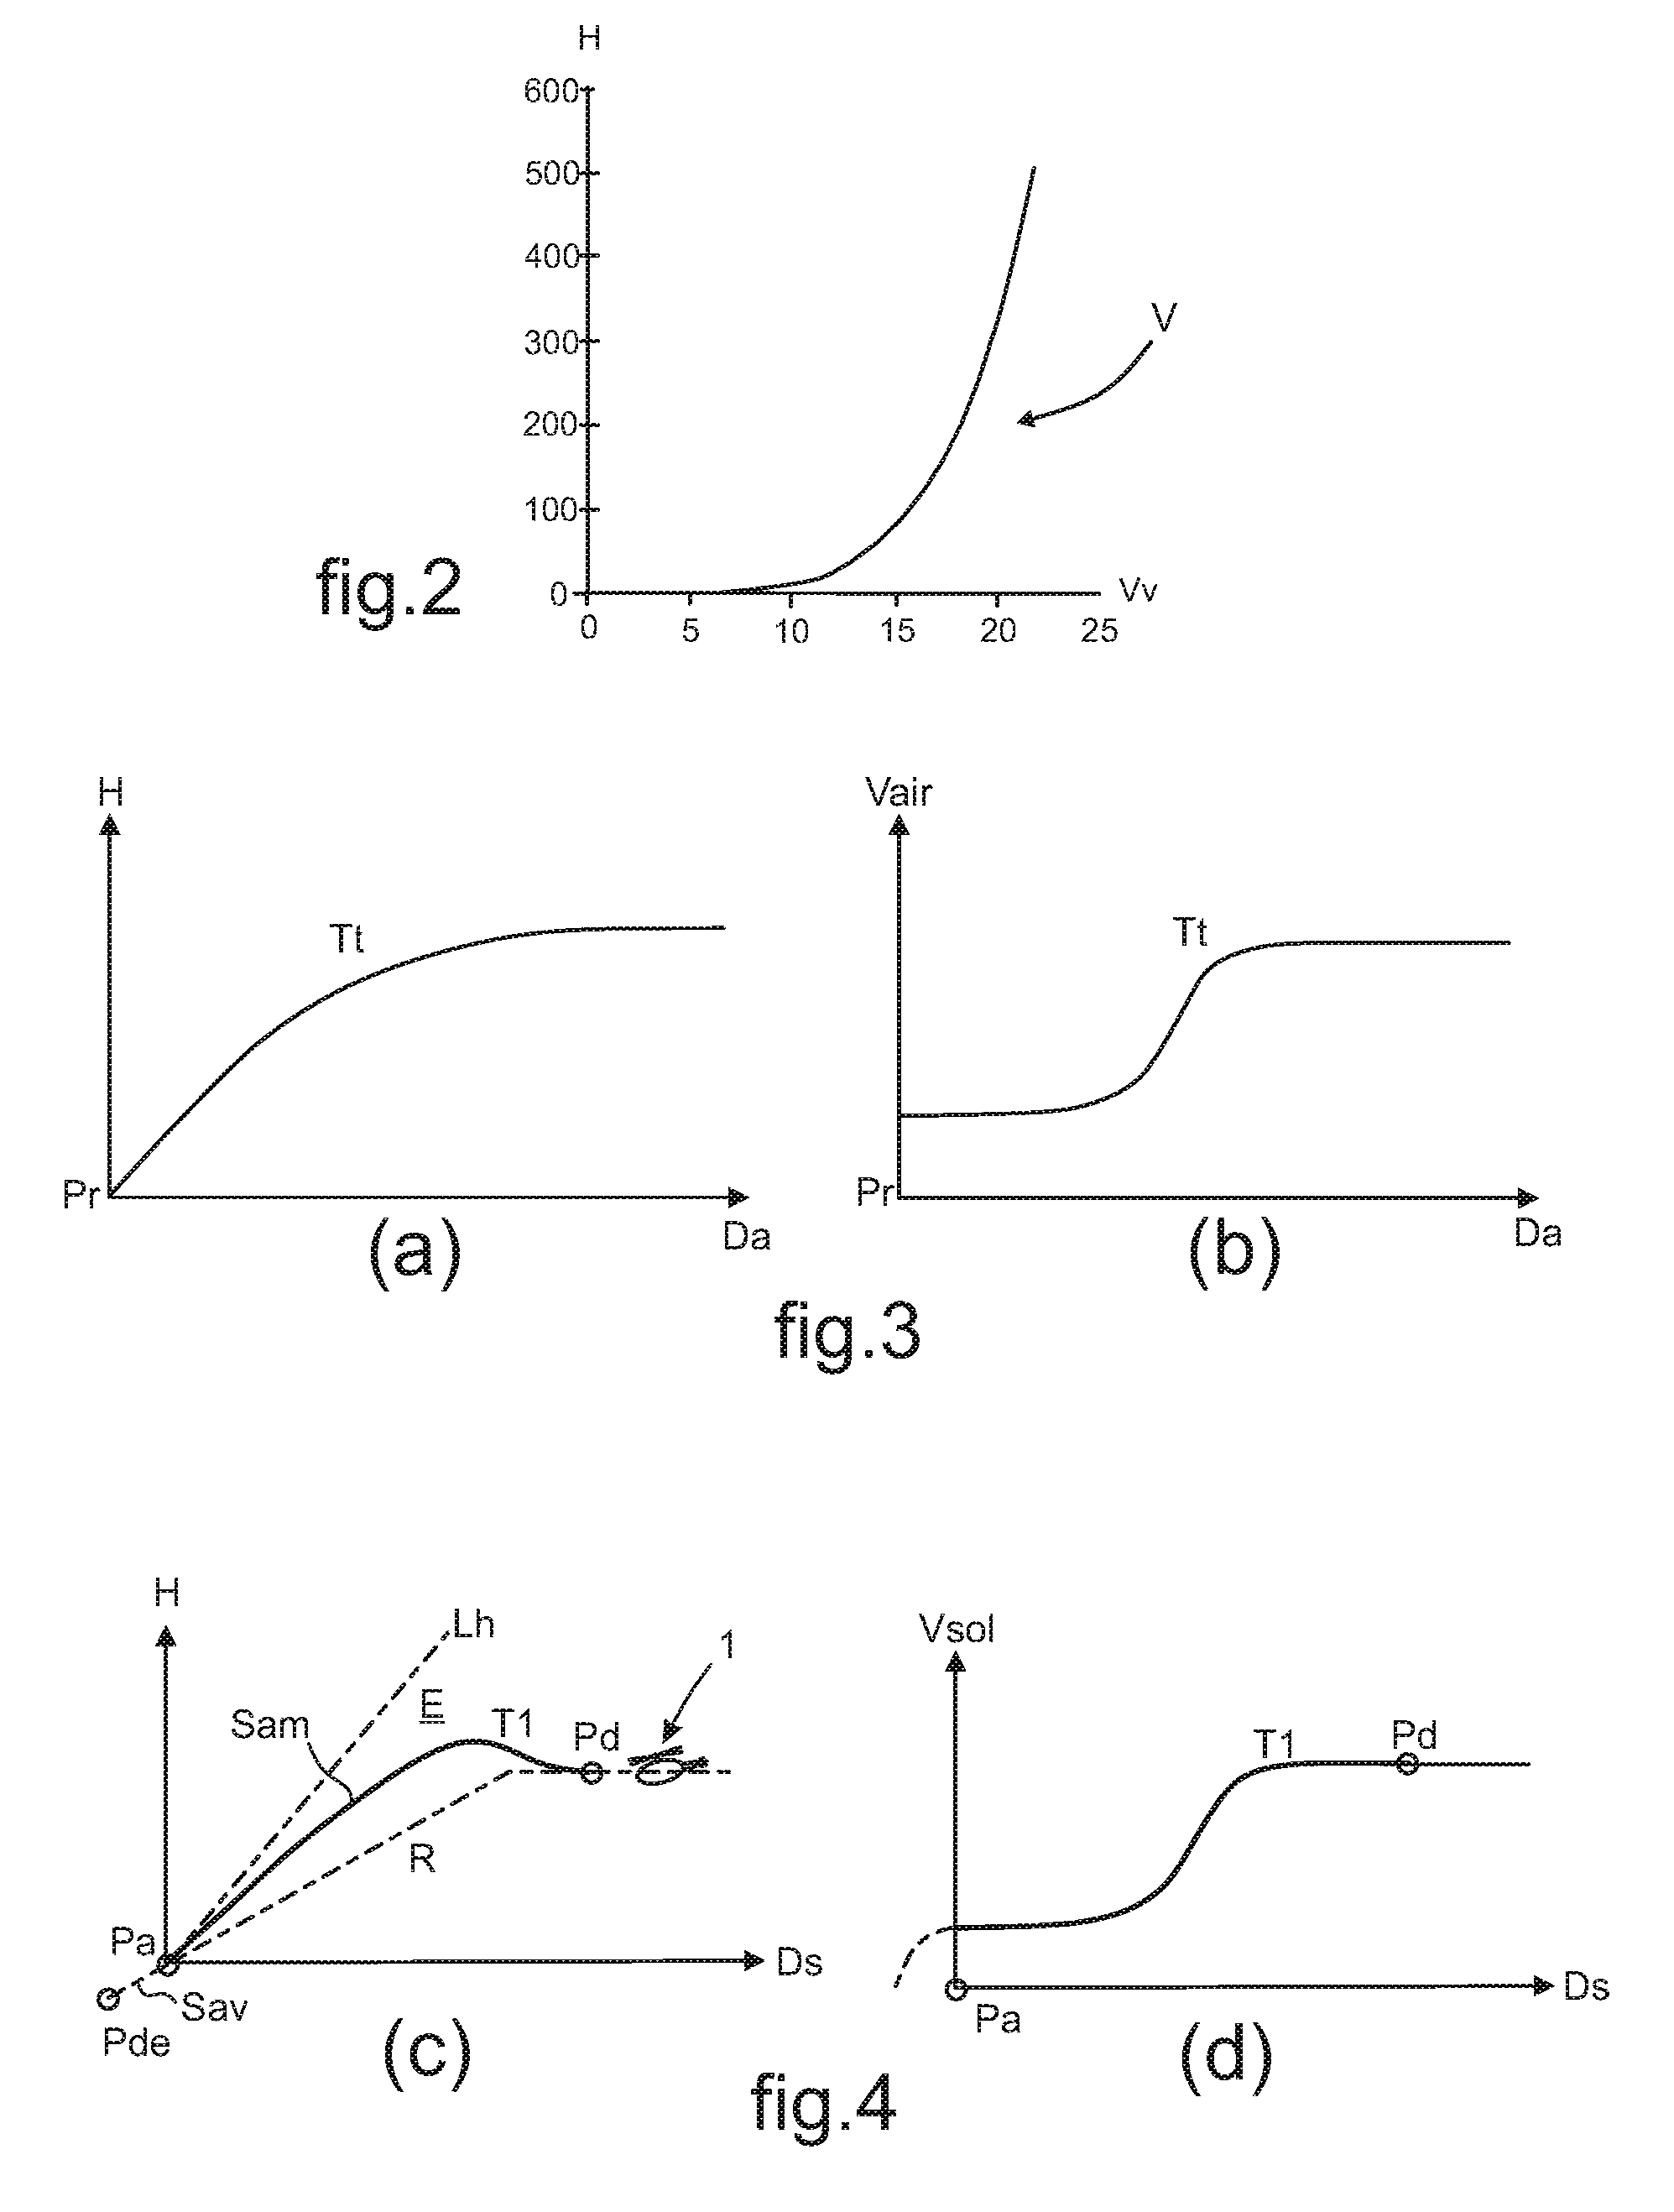 Method for the guidance of a rotorcraft, which method limits noise discomfort in a procedure for the approach to a landing point